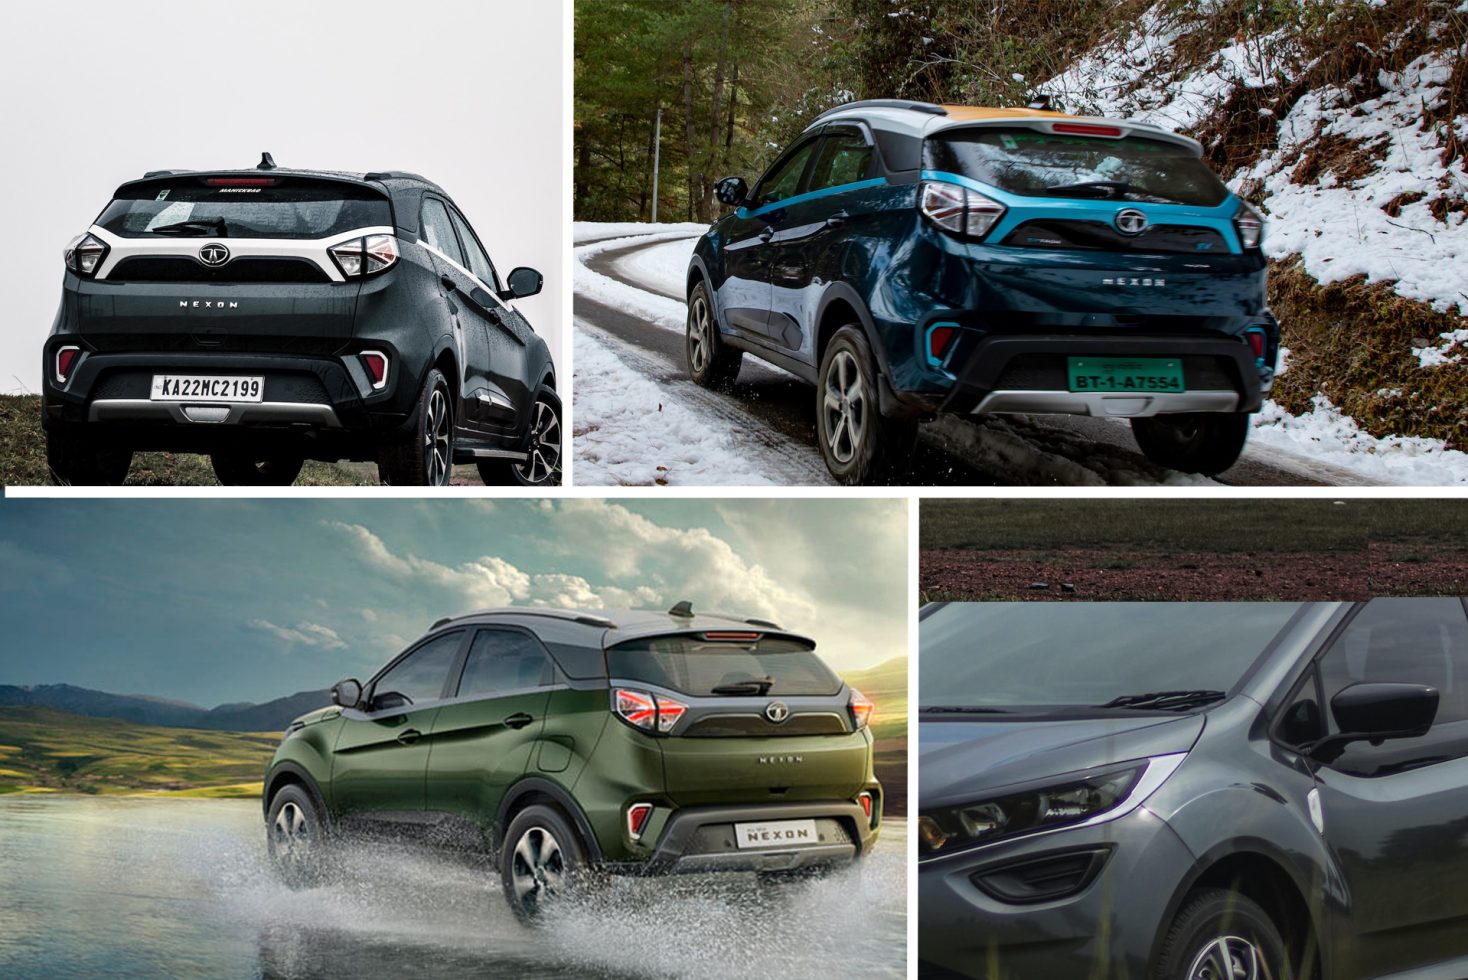 The Tata Nexon India’s Best Selling SUV is a Customer Favorite